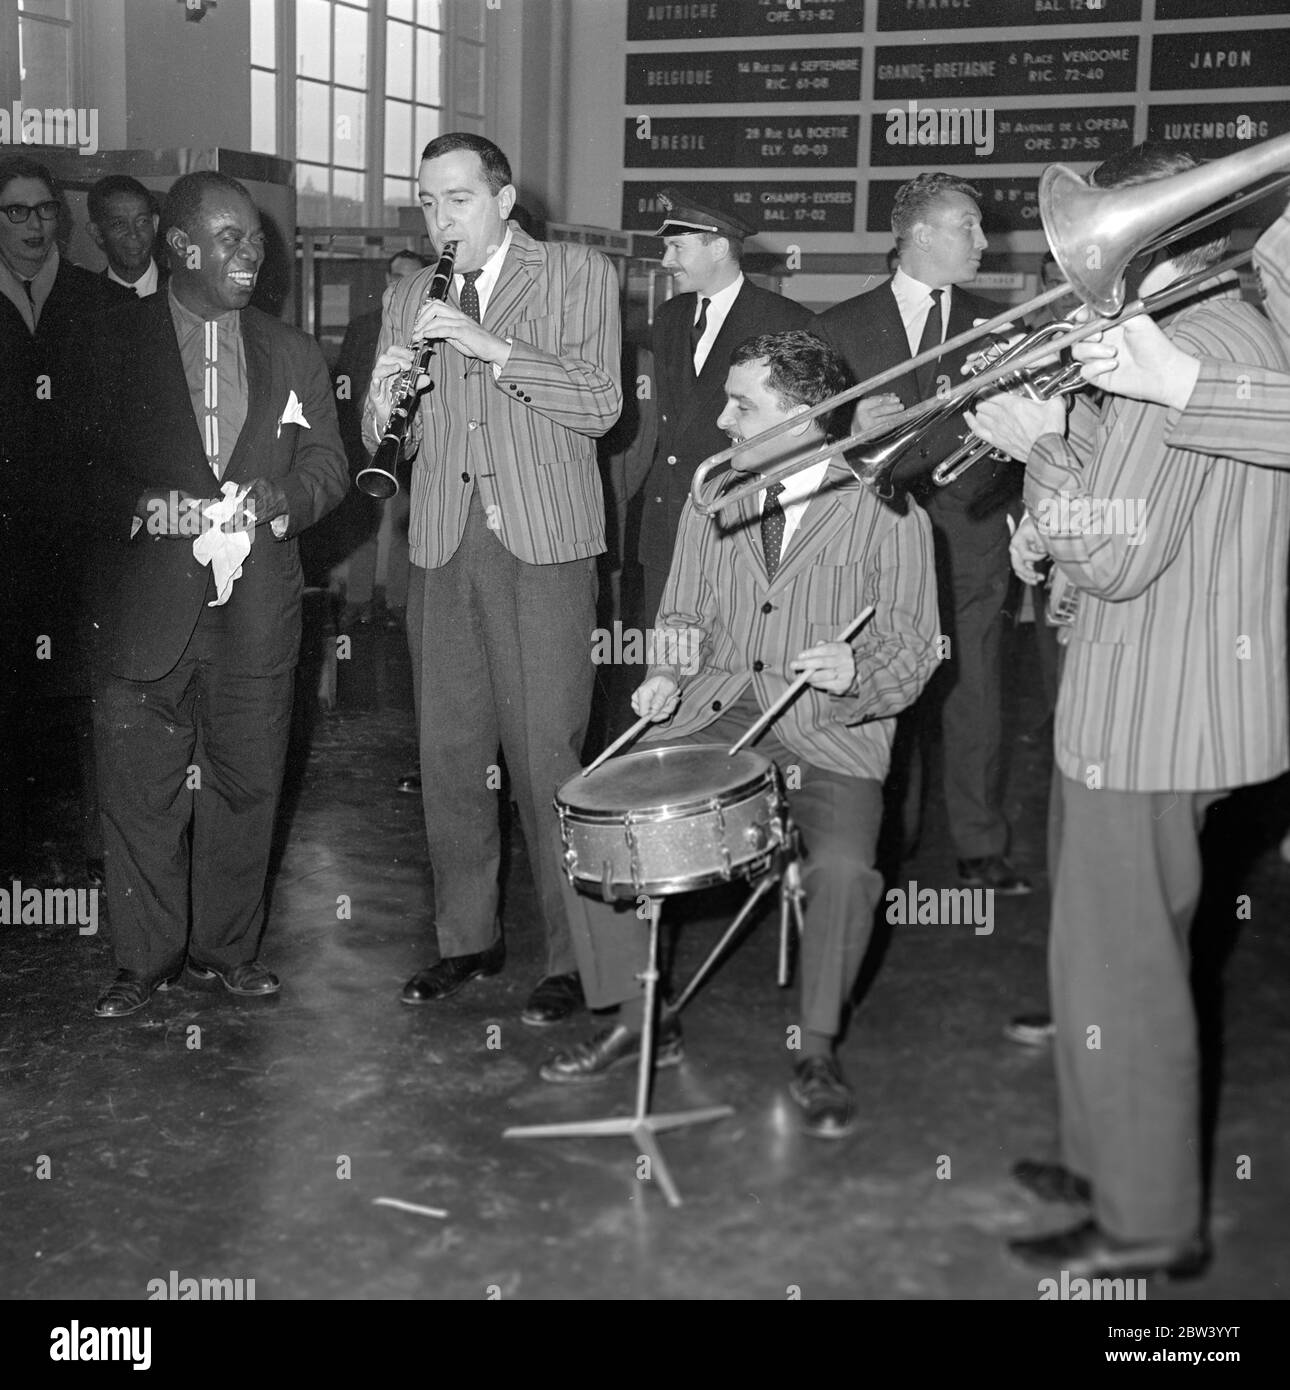 Louis Armstrong in Paris . The King of jazz , the celbrated Louis Armstrong and his orchestra have arrived this morning in Paris from Abidjan , on the last step of his journey from Africa . Louis Armstrong is in Paris to appear in ' Paris Blues ' alongside Paul Newman , Joanne Woodward and Sydney Poitier , under the direction of Martin Ritt . After their arrival from Orly here are Louis Armstrong and Velma Middleton surrounded by the musicians of the Mowgli Jospin High Society Jazz Band who came to play at the Paris Airport . 5 December 1960 Stock Photo